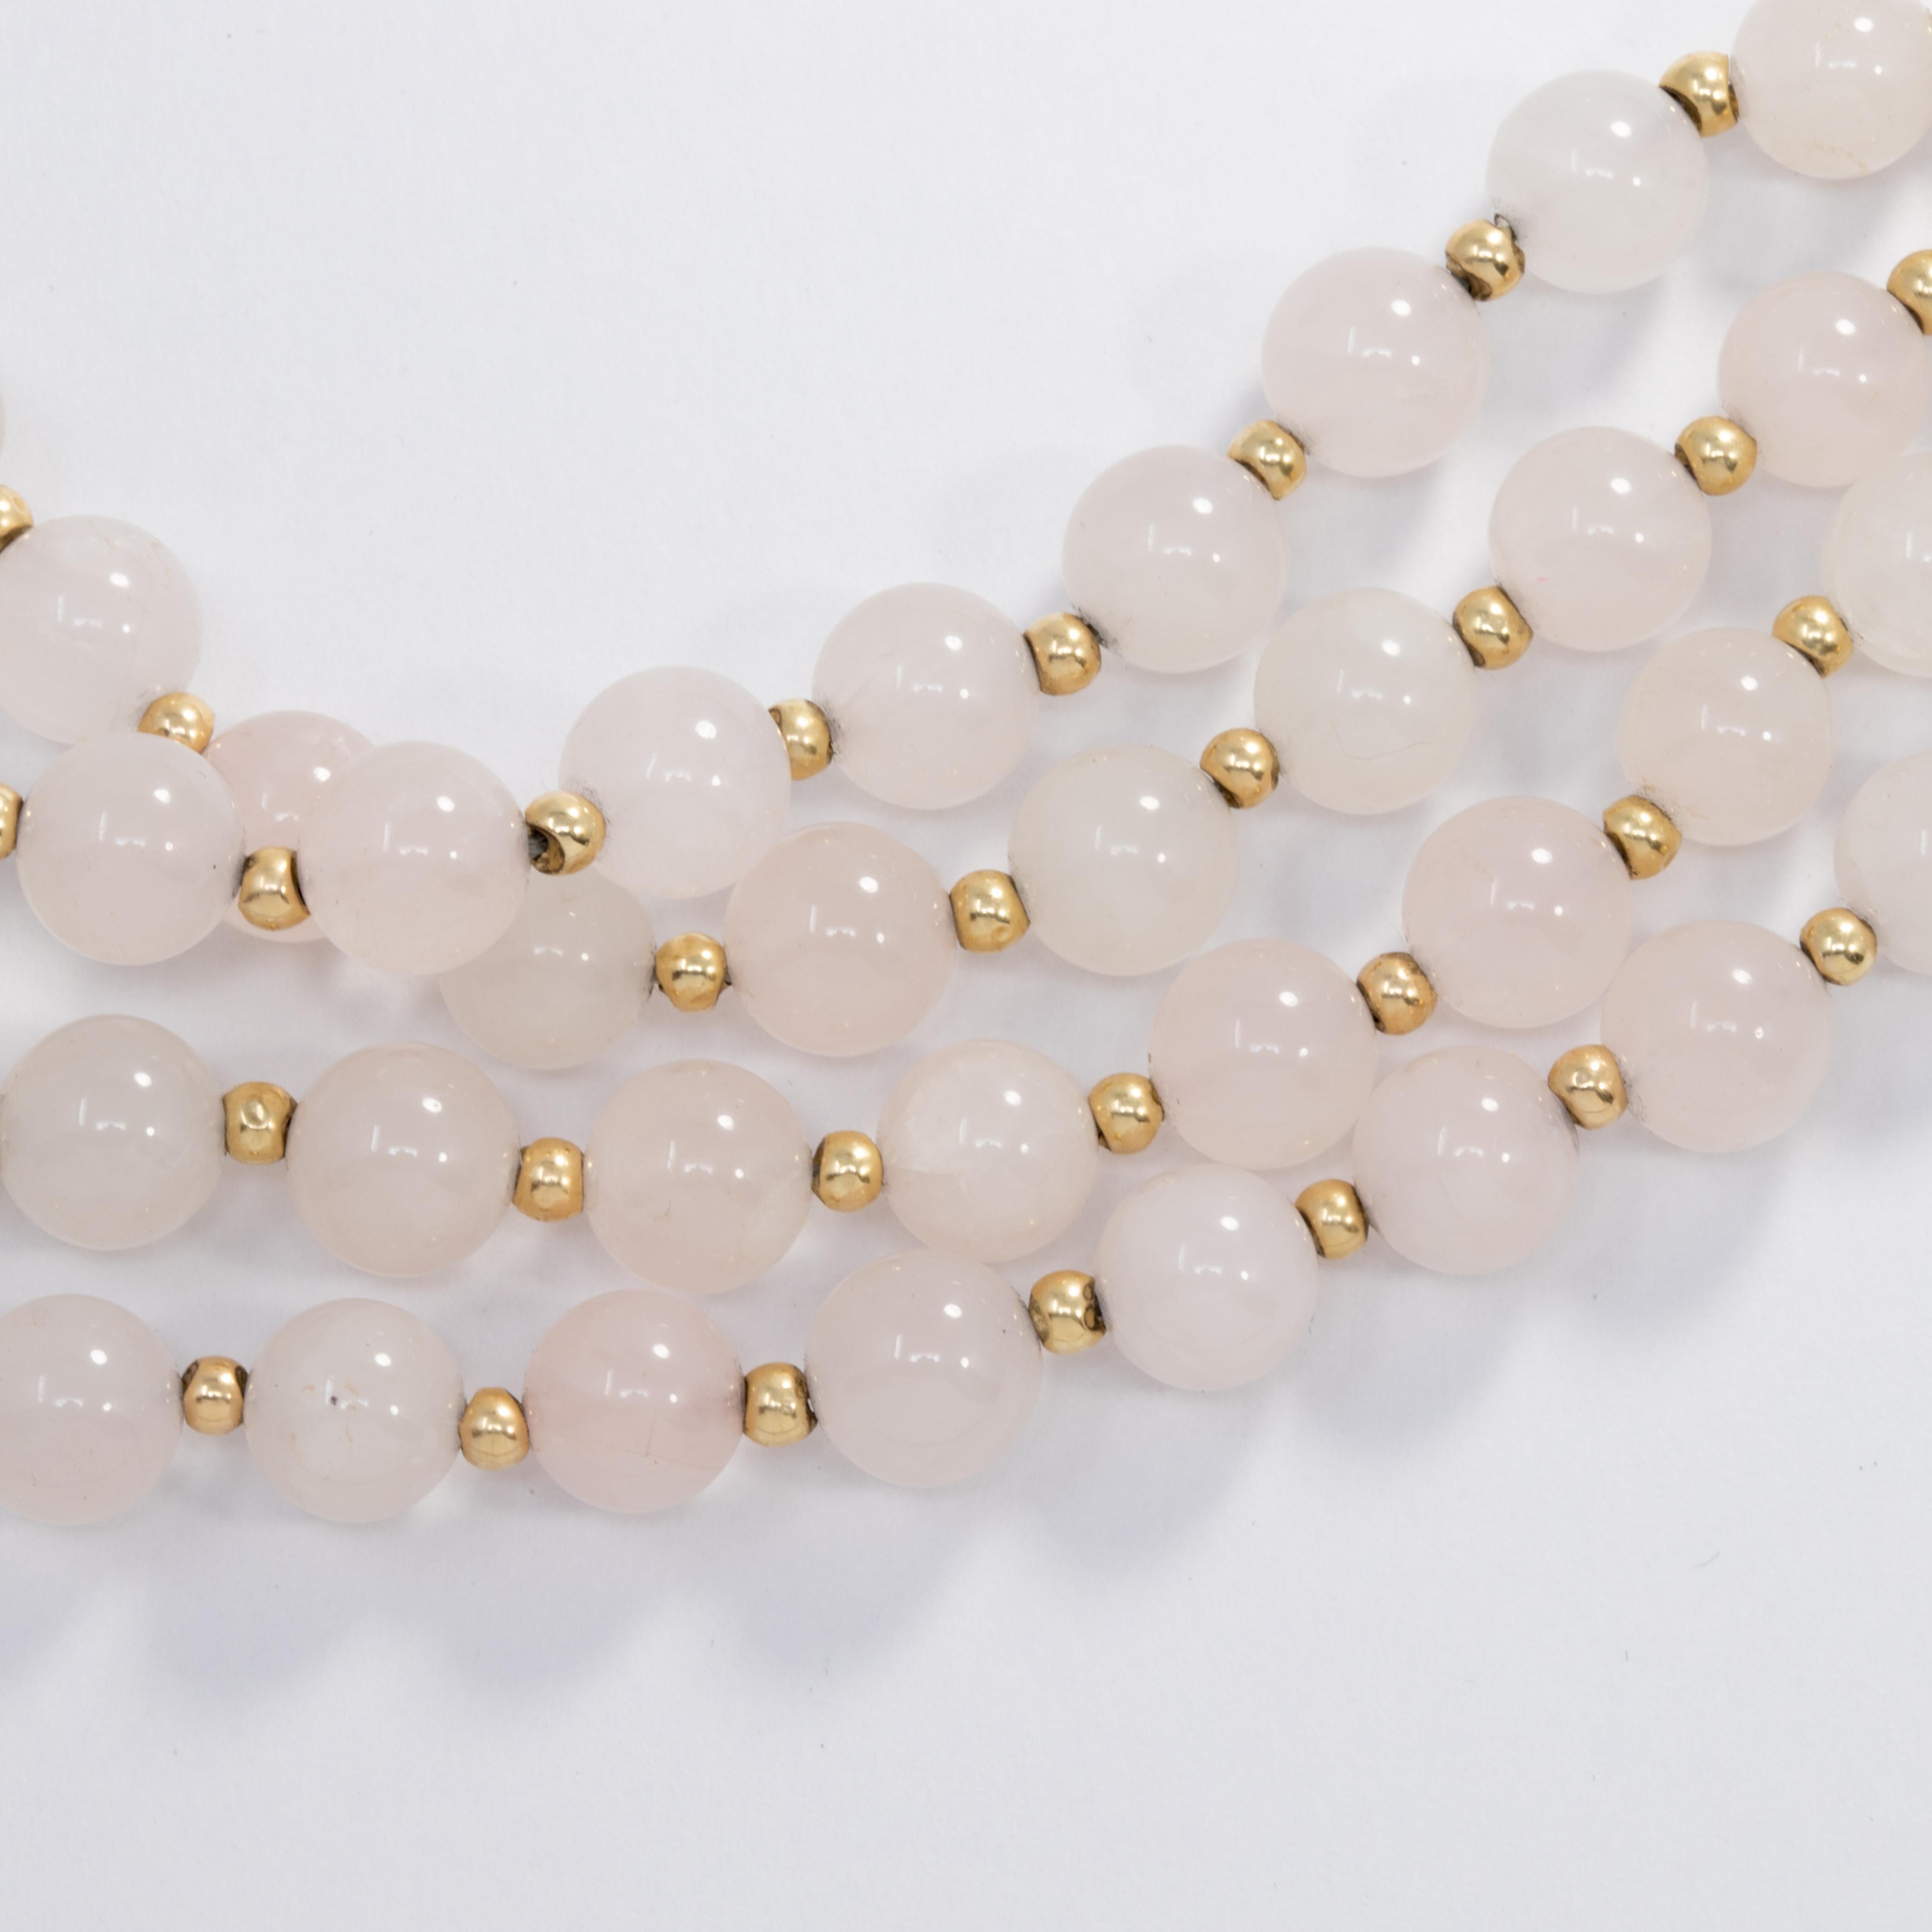 Long necklace featuring a single strand of opaque white quartz beads accented with gold findings. Extravagant!